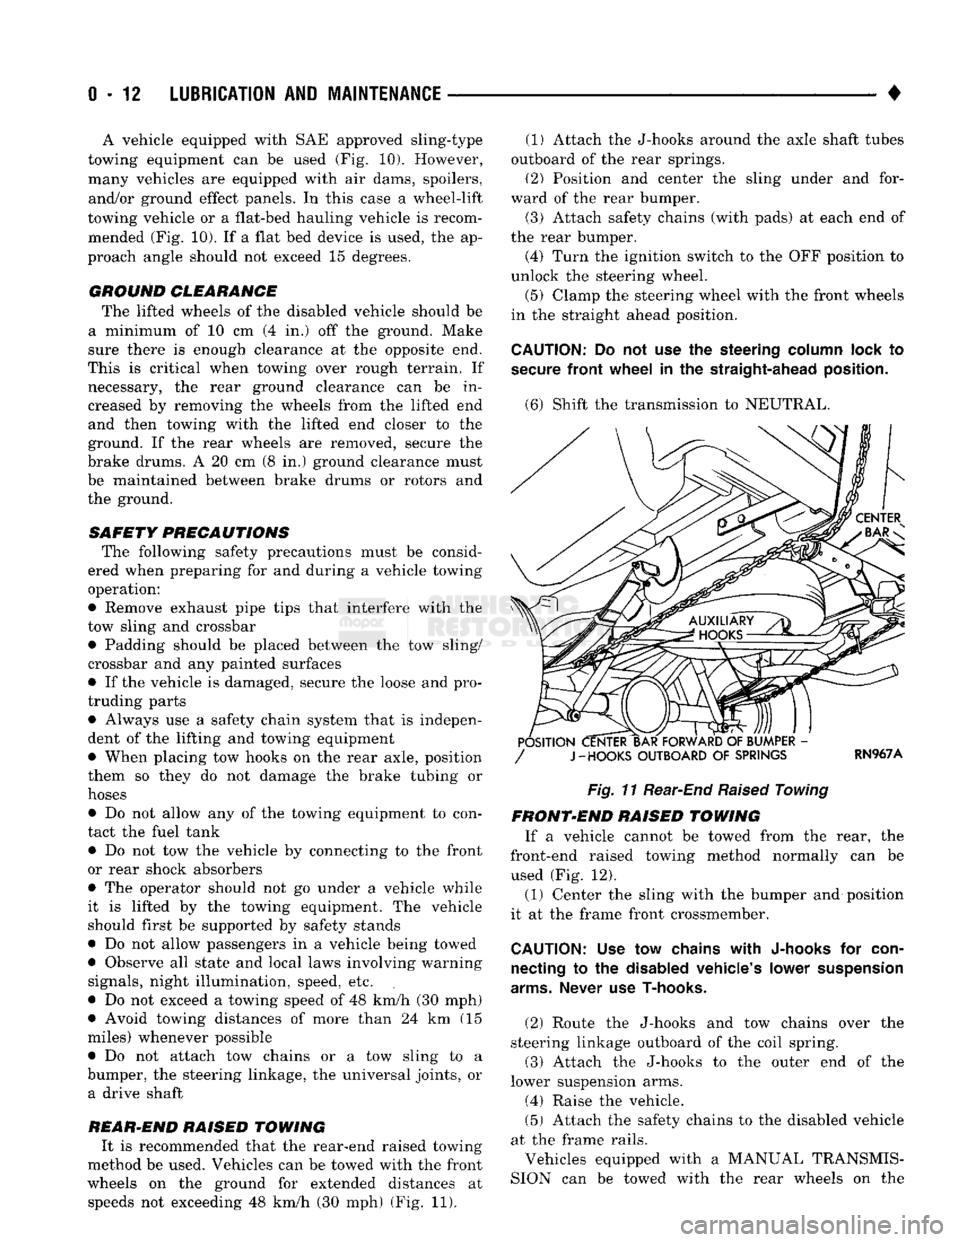 DODGE TRUCK 1993  Service Repair Manual 
0 - 12
 LUBRICATION
 AND
 MAINTENANCE 

• A vehicle equipped with SAE approved sling-type 
towing equipment can be used (Fig. 10). However, 
many vehicles are equipped with air dams, spoilers,  and